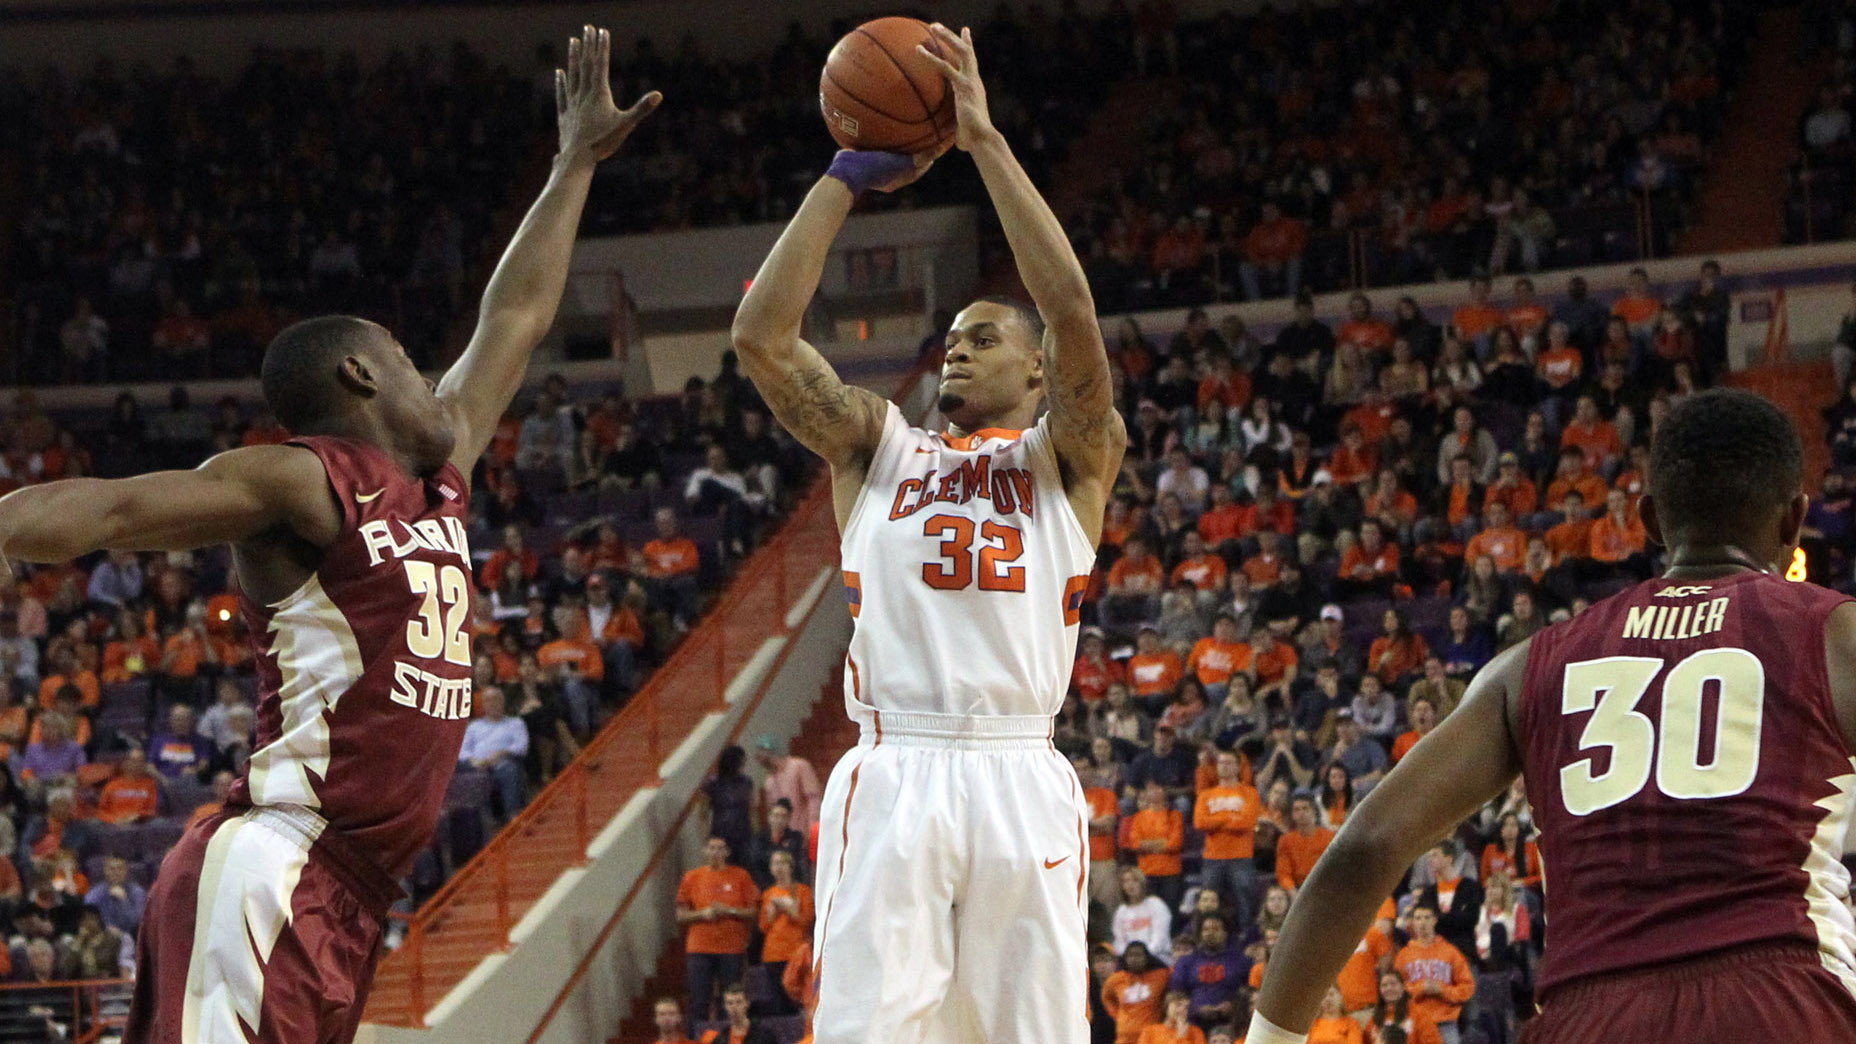 Clemson Miscues Costly in 56-41 Loss to Florida State